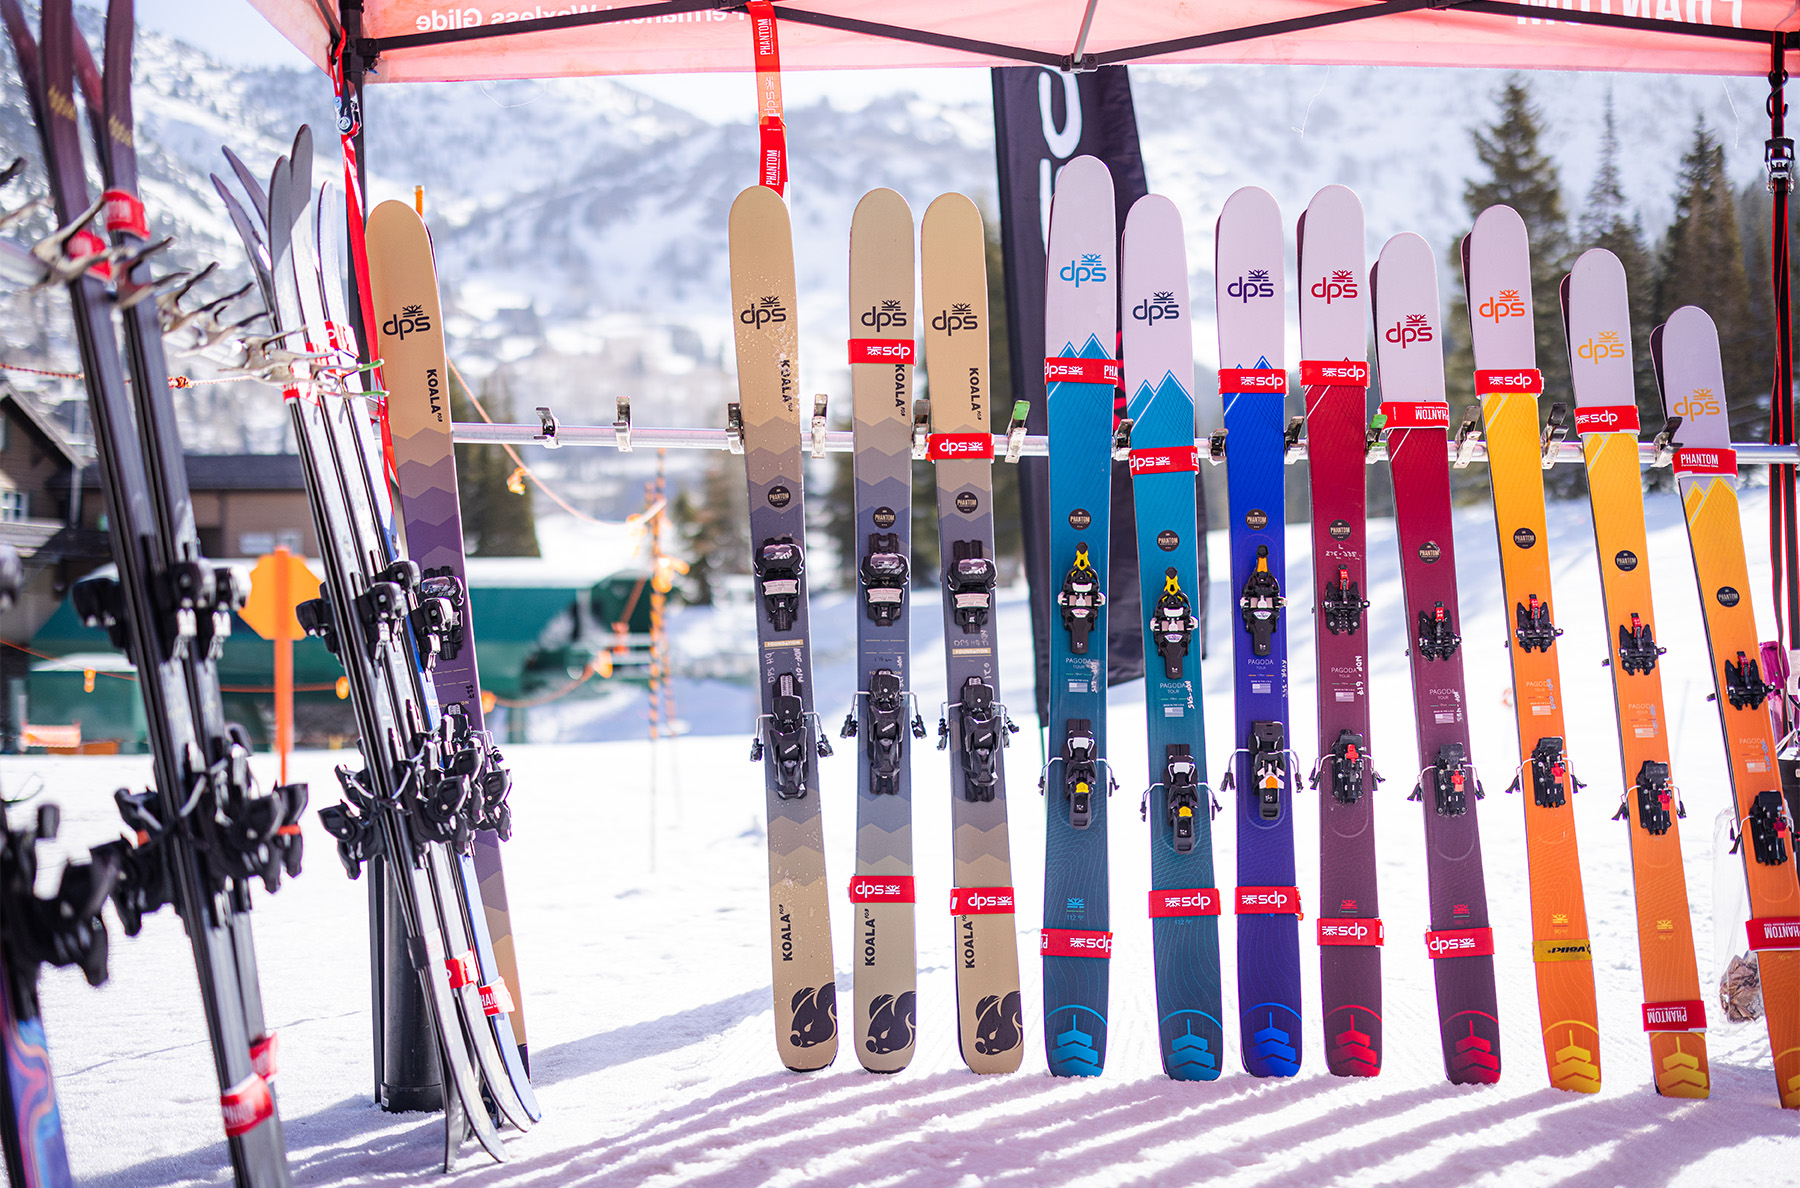 On GEAR:30, we talk with DPS’s VP of product and operations about the recent history of DPS; discuss some of the specific skis in their lineup; hear a defense of carbon fiber; define a new rule for product design; clarify DPS Phantom; & more.